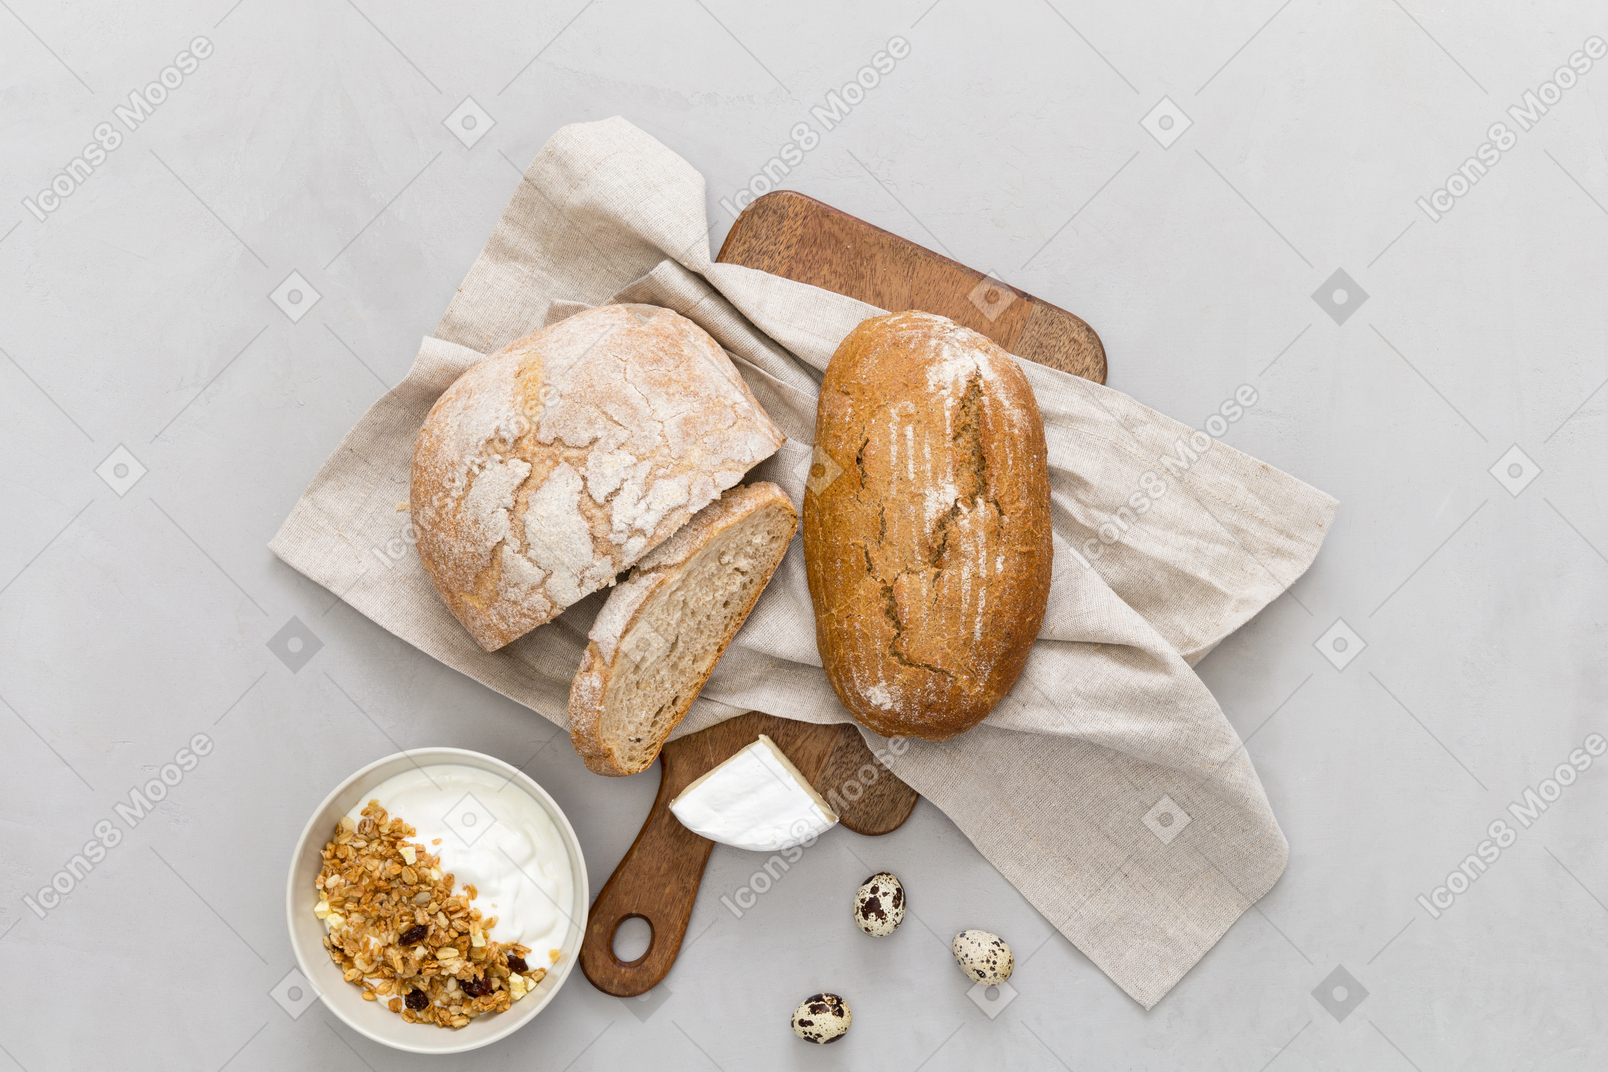 Bread, cereals and eggs